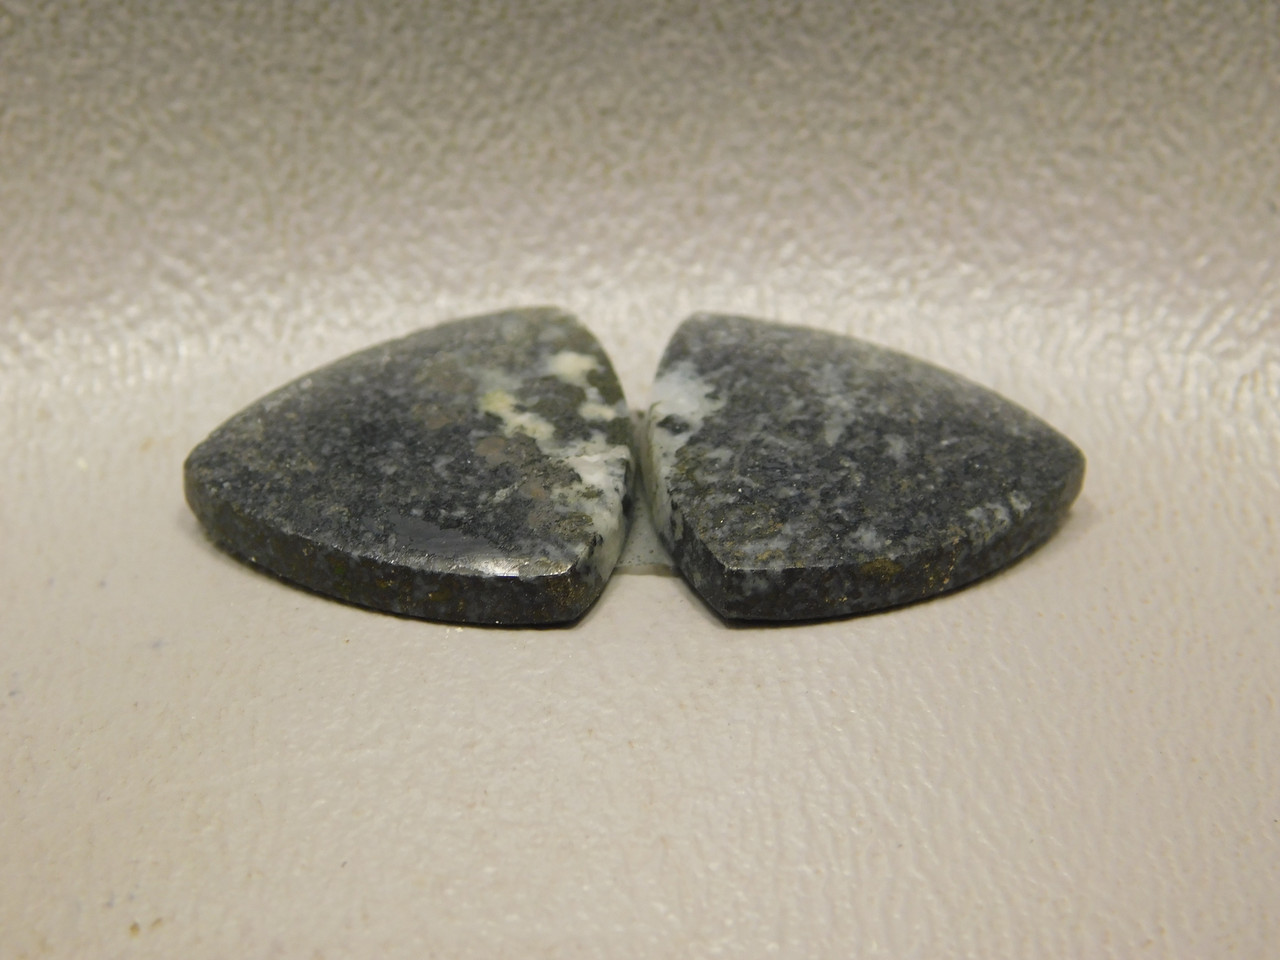 Mohawkite Stone Matched Pair Cabochons 18 mm Trillion Triangles #4 